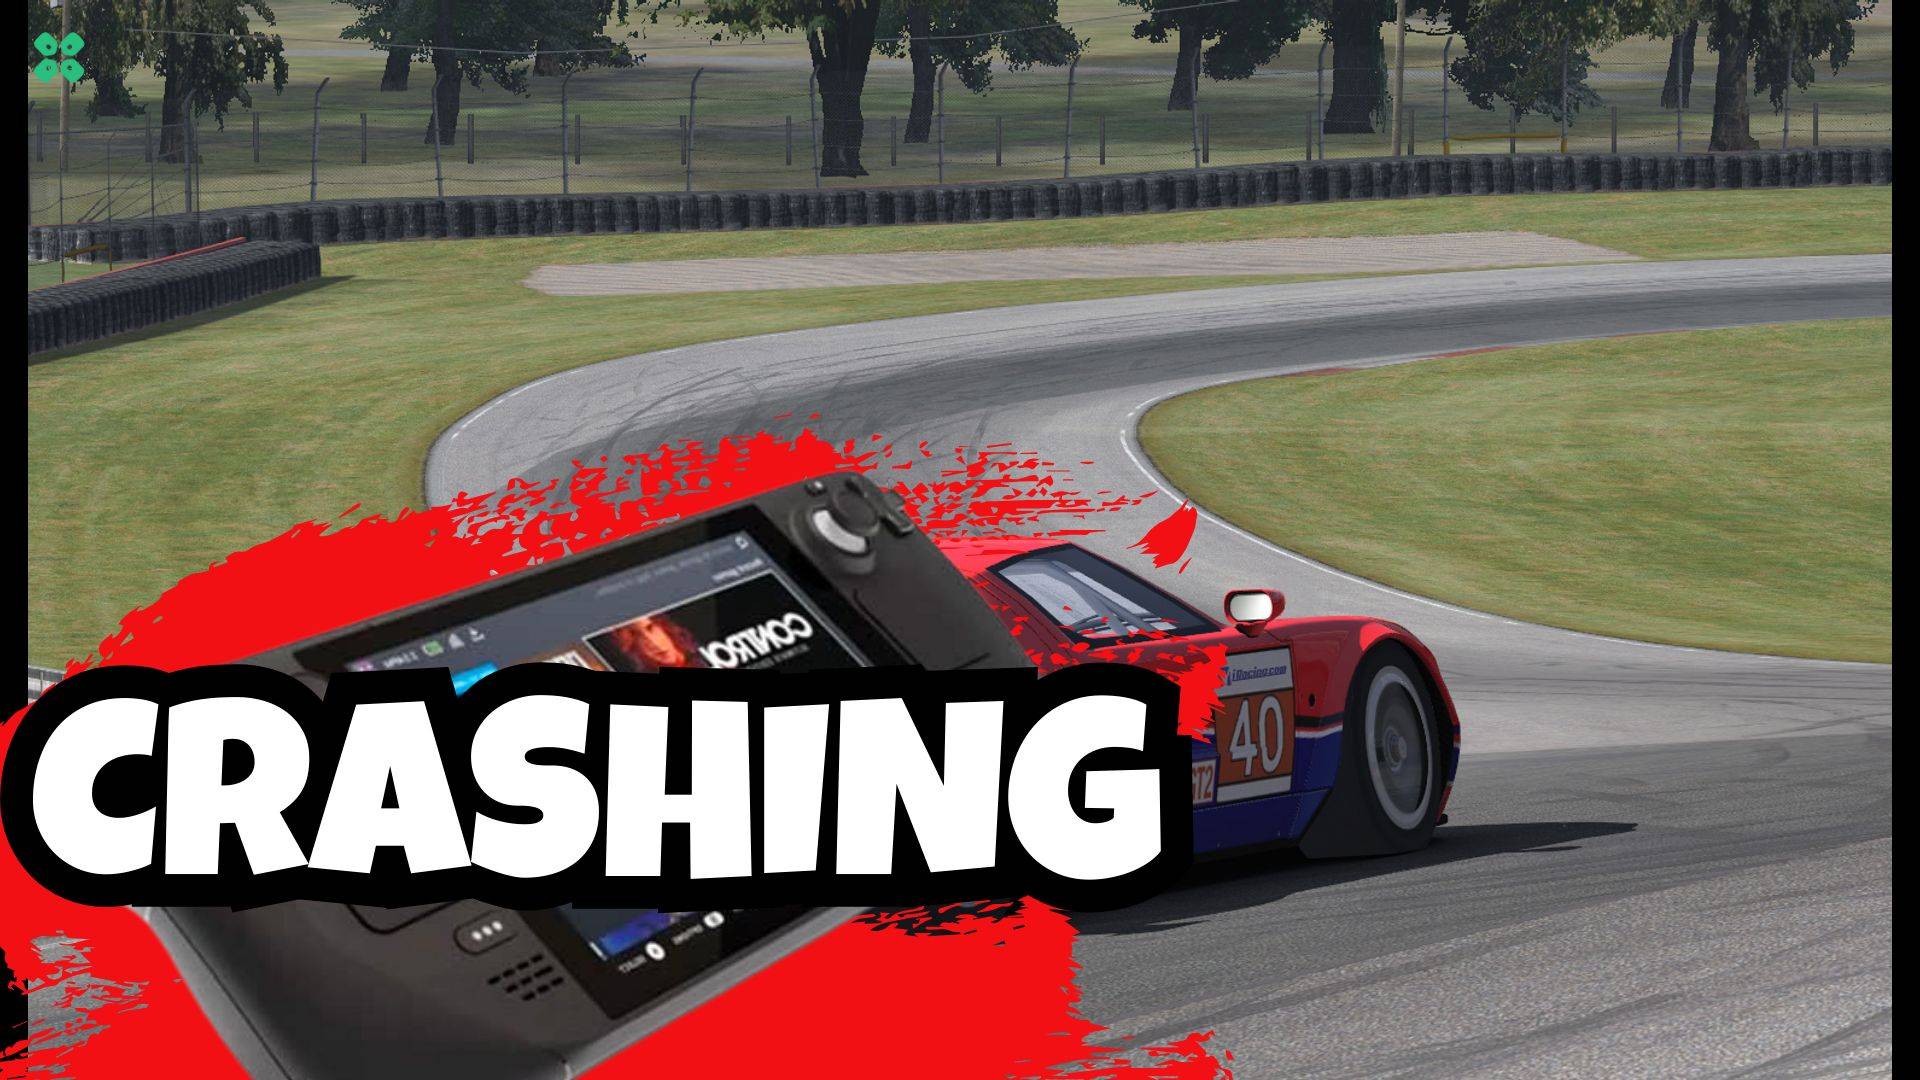 Artwork of iRacing and its fix of crashing by TCG